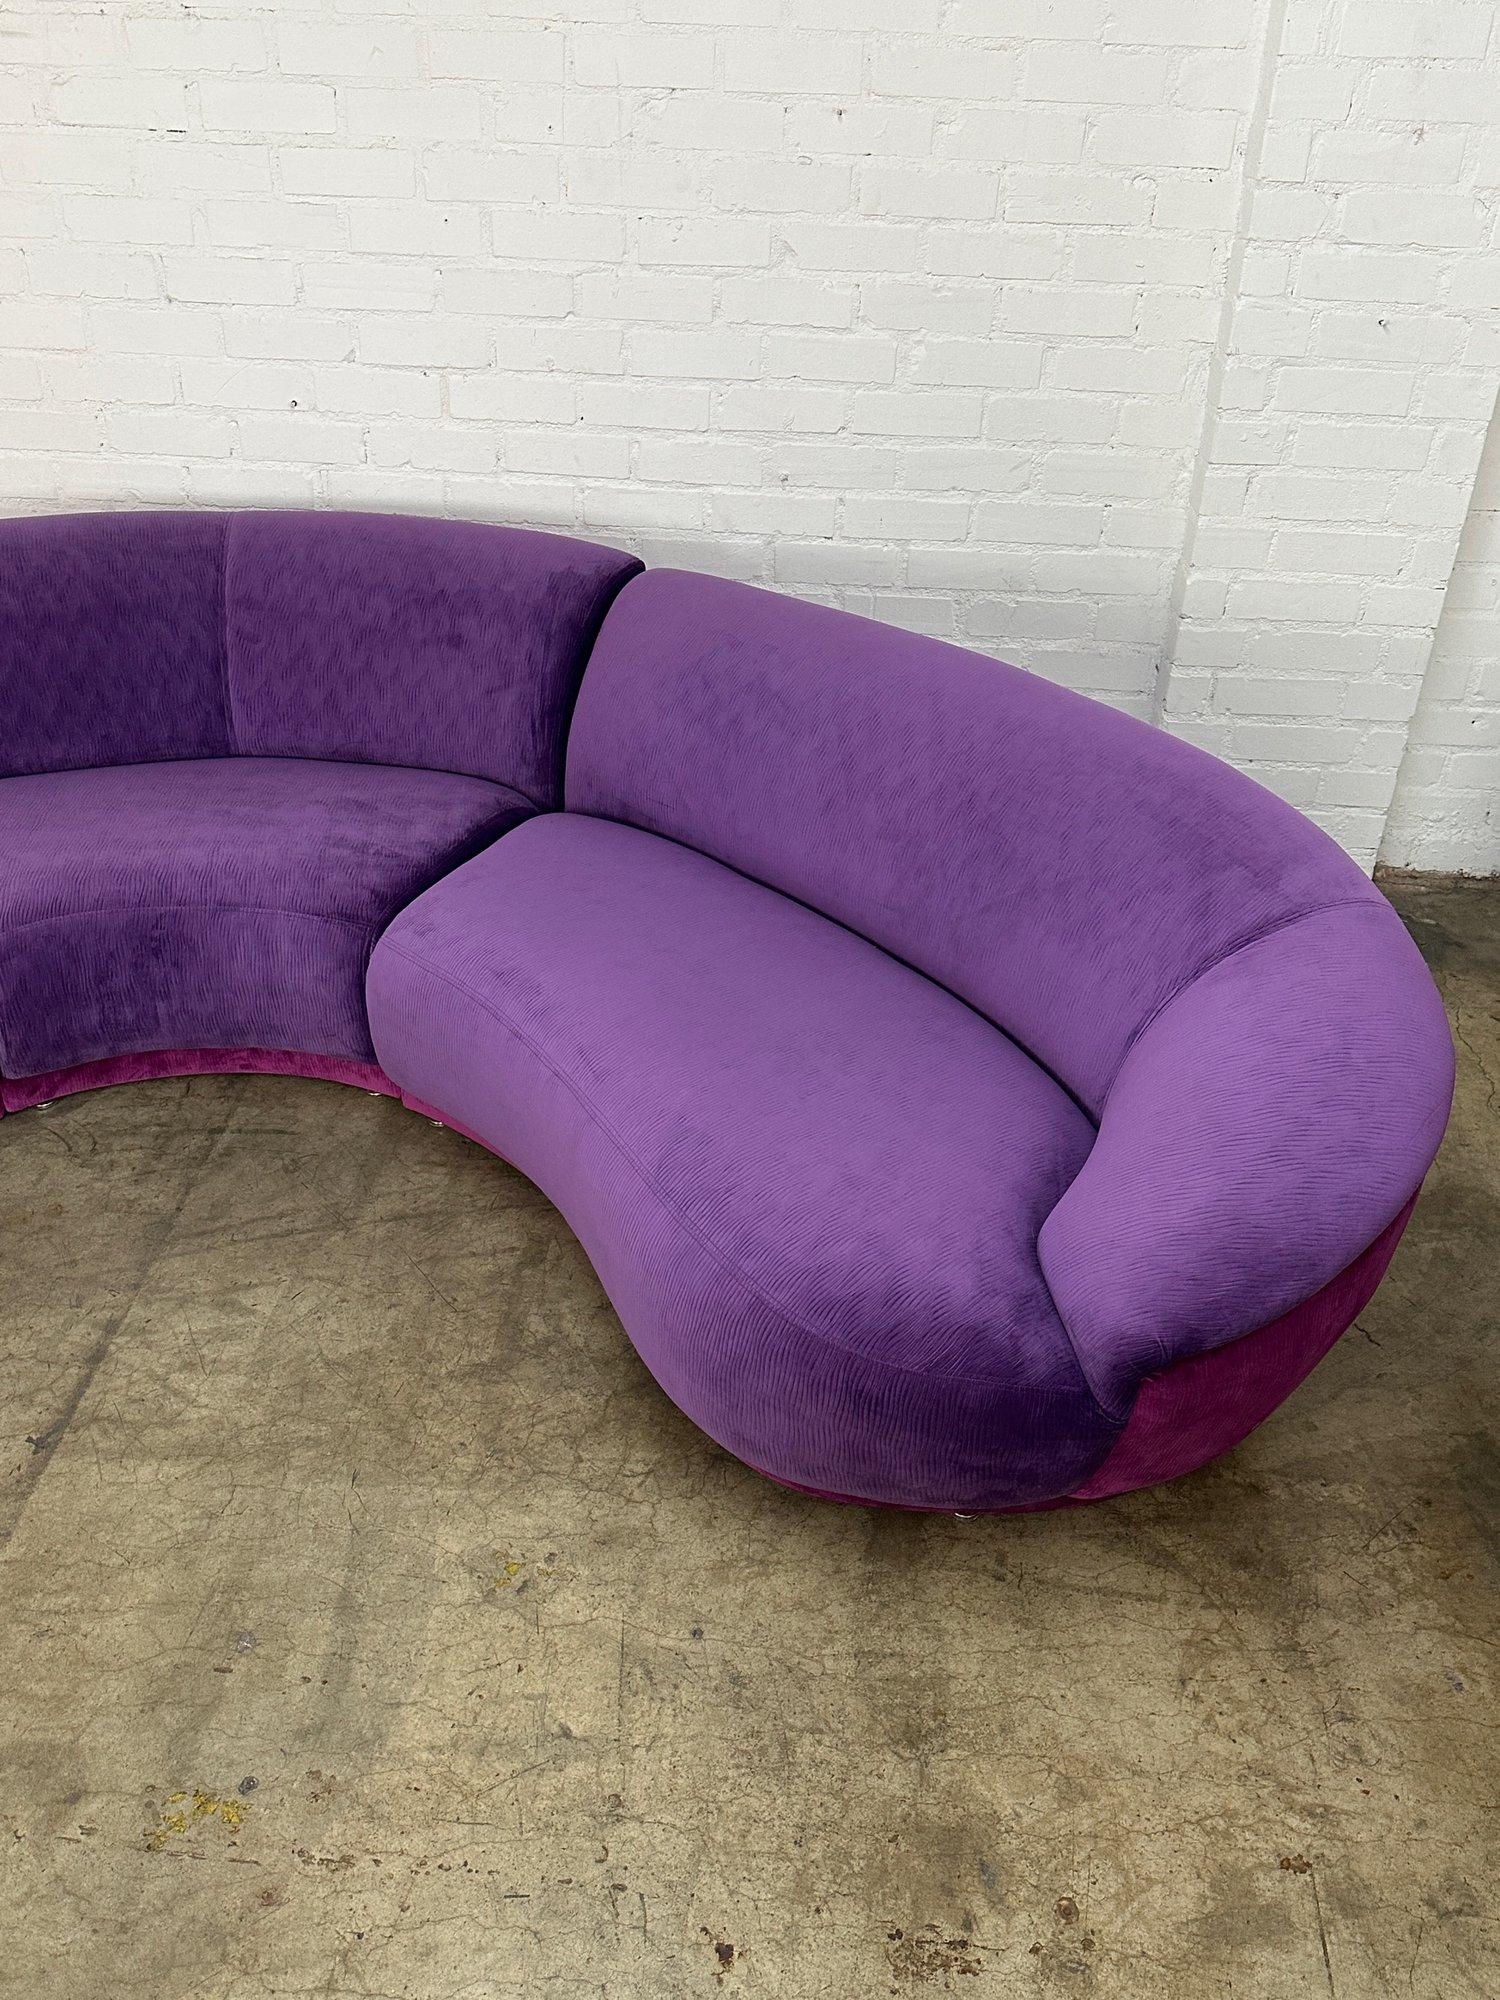 Late 20th Century Post Modern Sofa - As Found For Sale